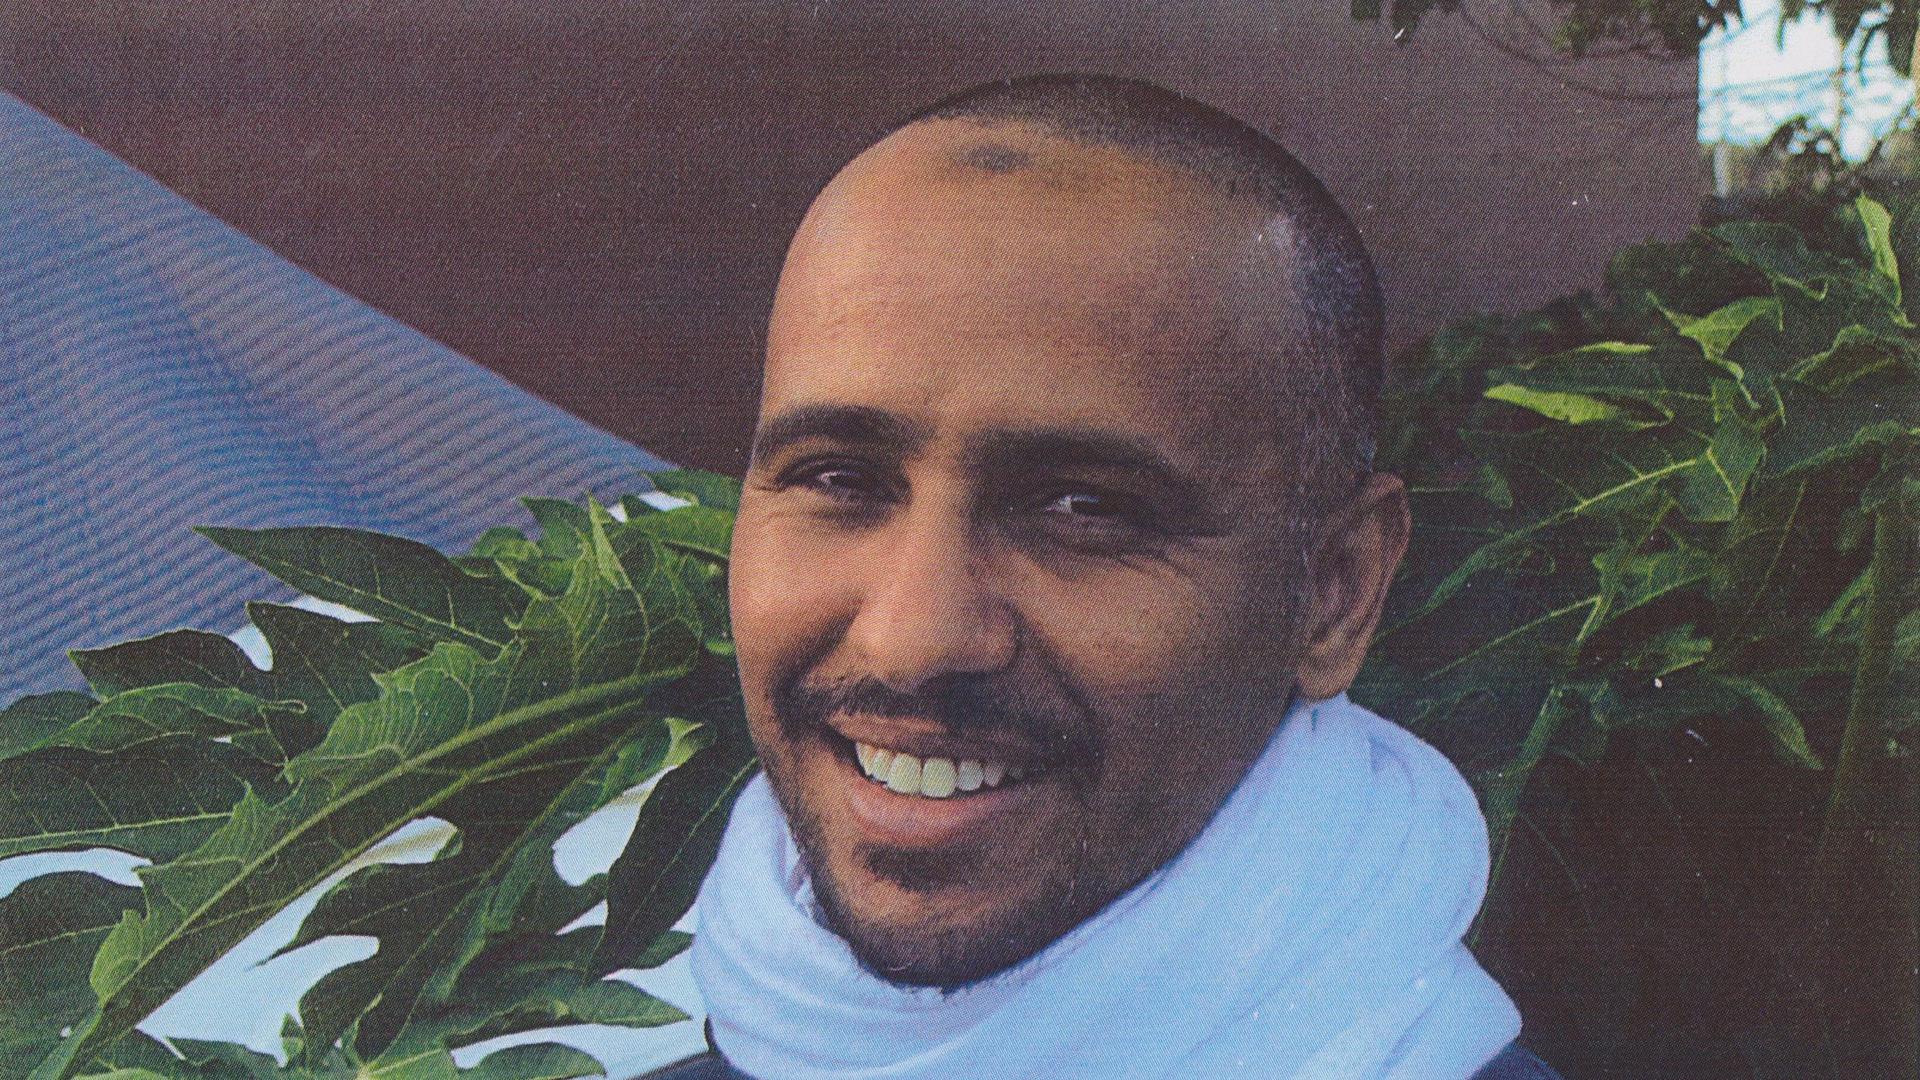 Mohamedou Ould Slahi has been imprisoned at Guantánamo since 2002 without charges.